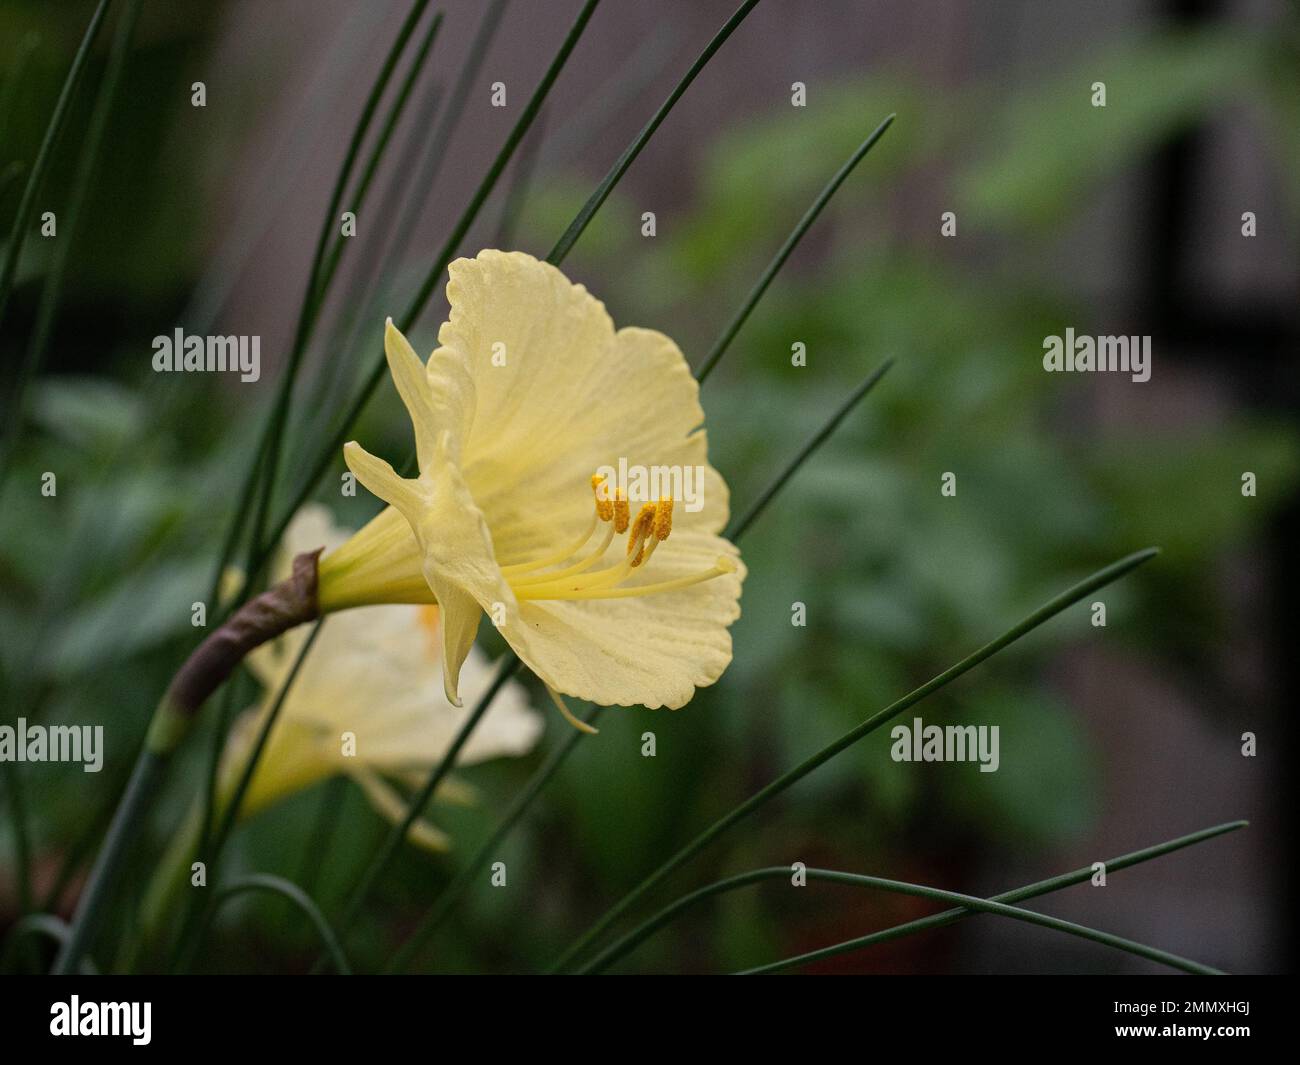 A close up of the primrose yellow trumpet shaped flower of the miniature daffodil Narcissus romieuxii Stock Photo